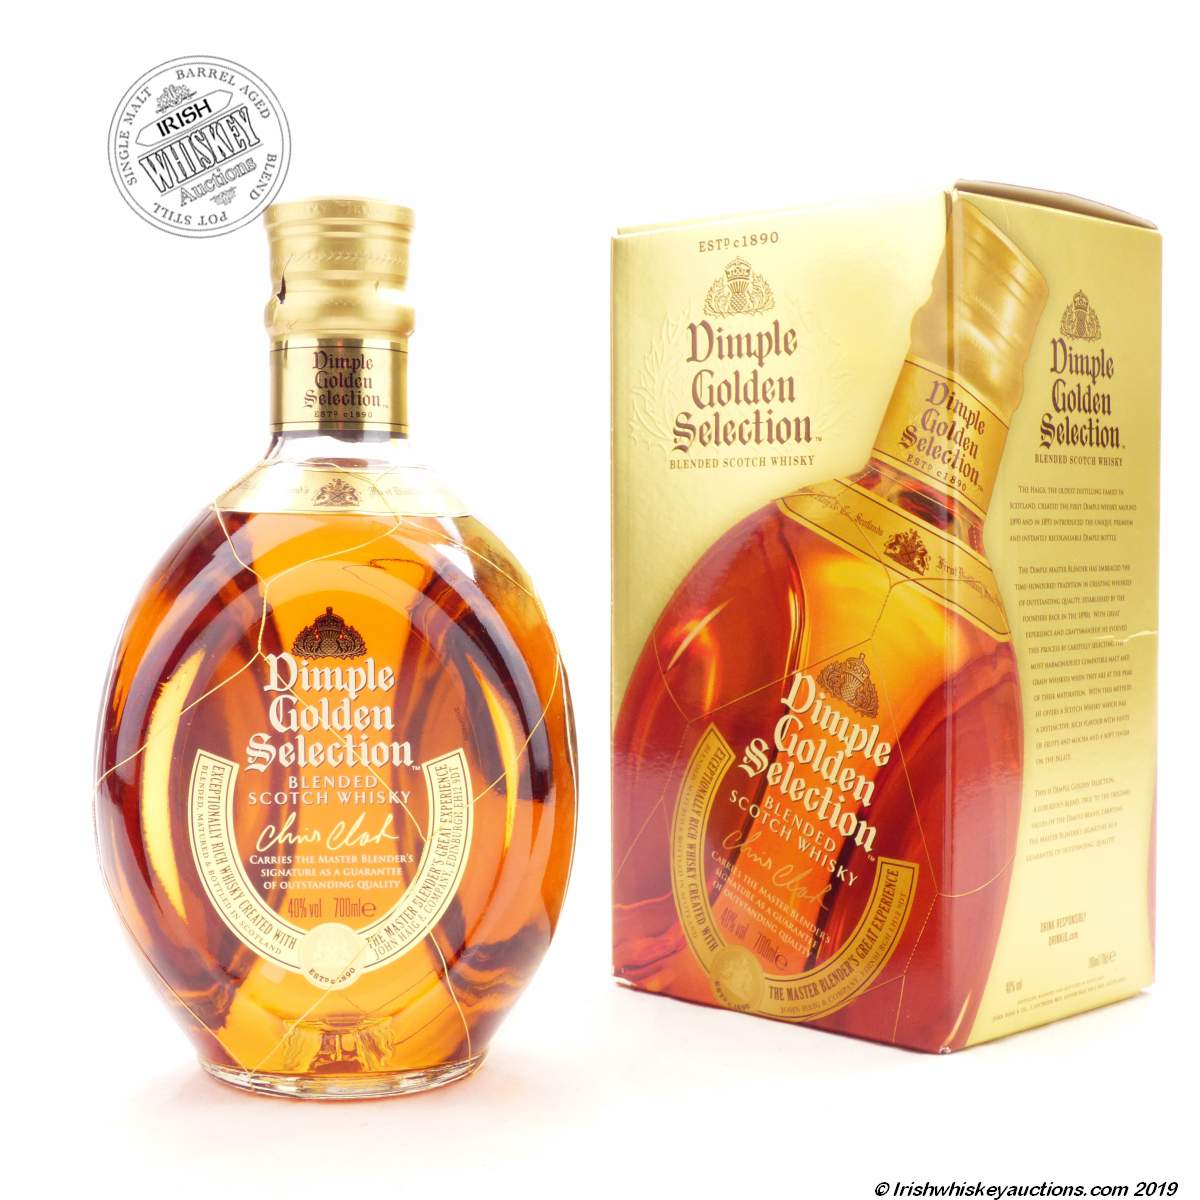 Irish Whiskey | Golden Whisky Blended Dimple Scotch Selection Auctions